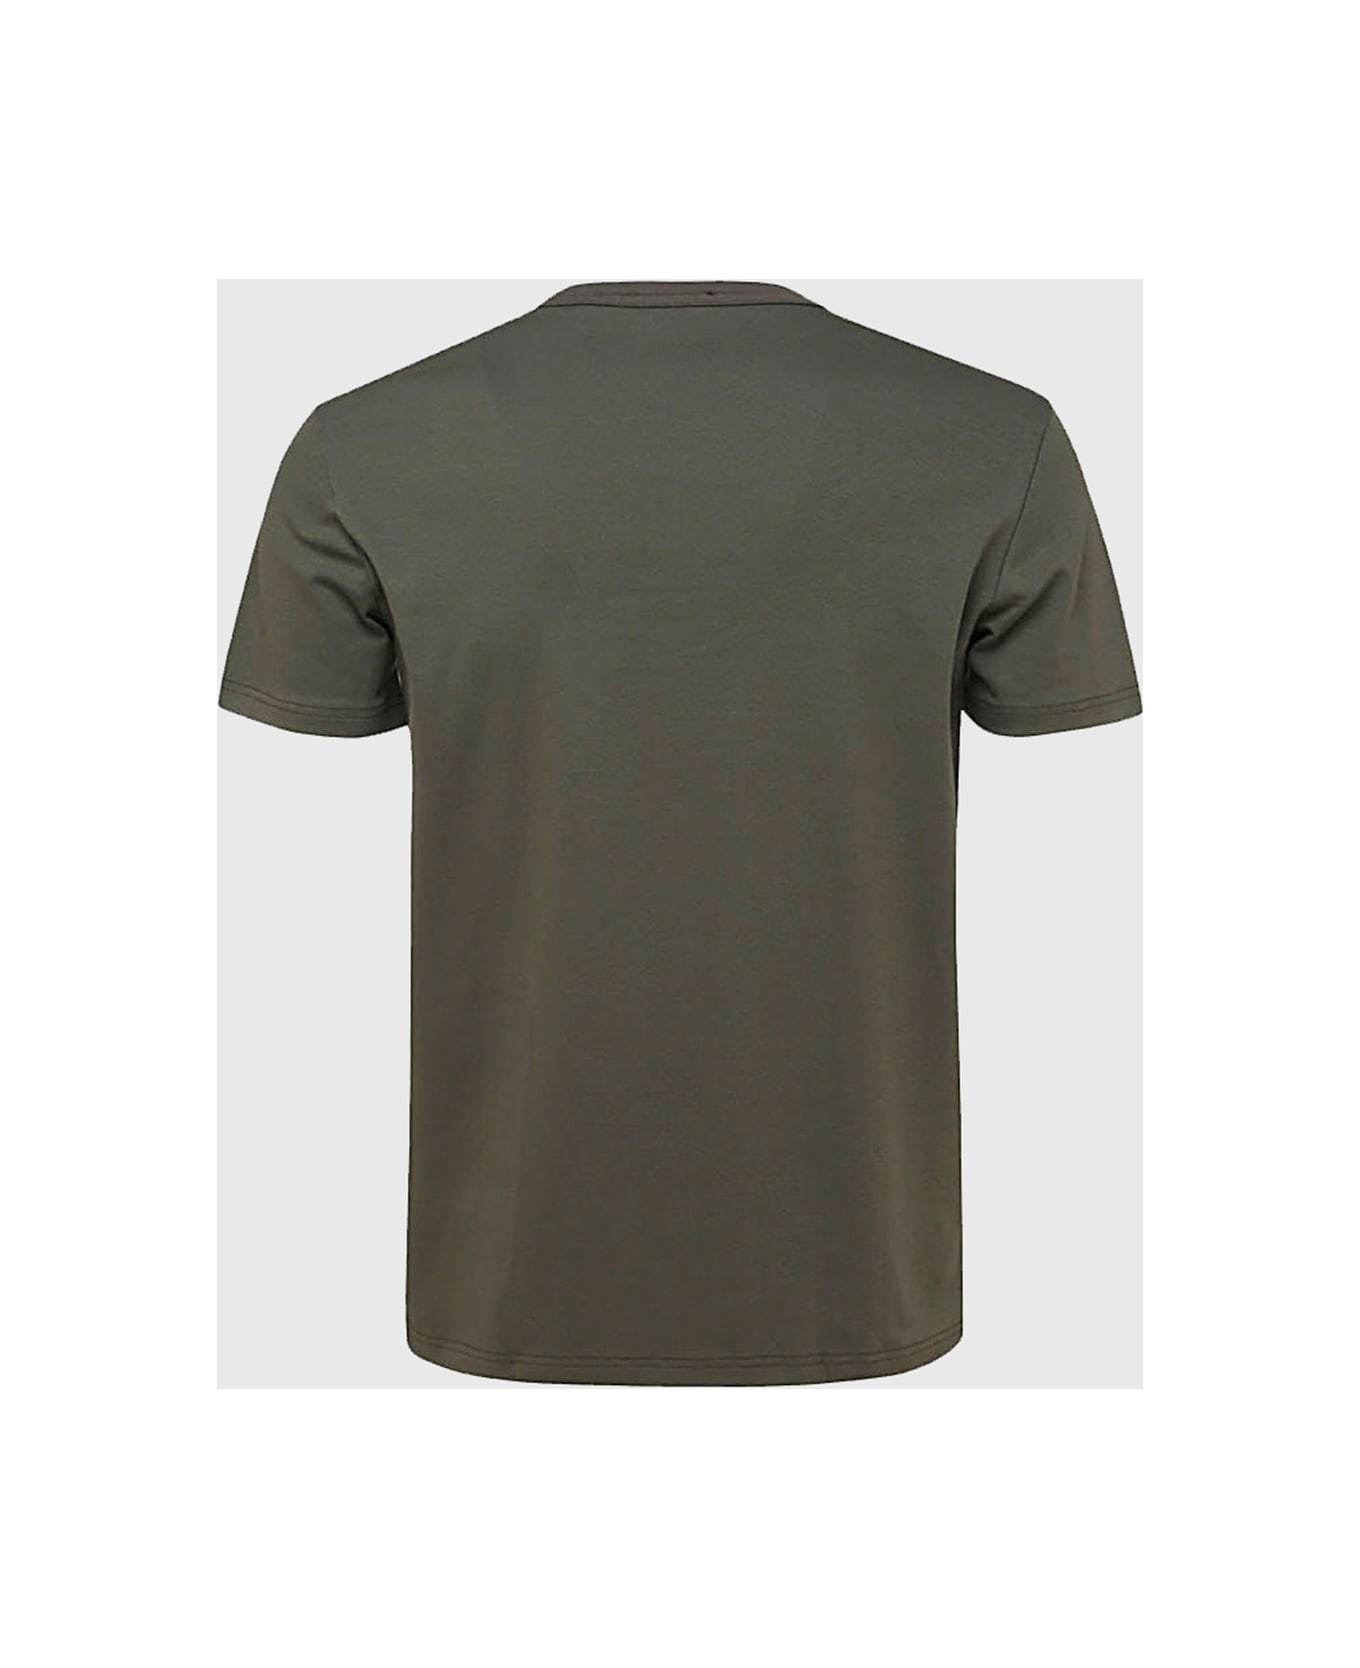 Tom Ford Military Green Cotton Blend T-shirt - MILITARY GREEN シャツ